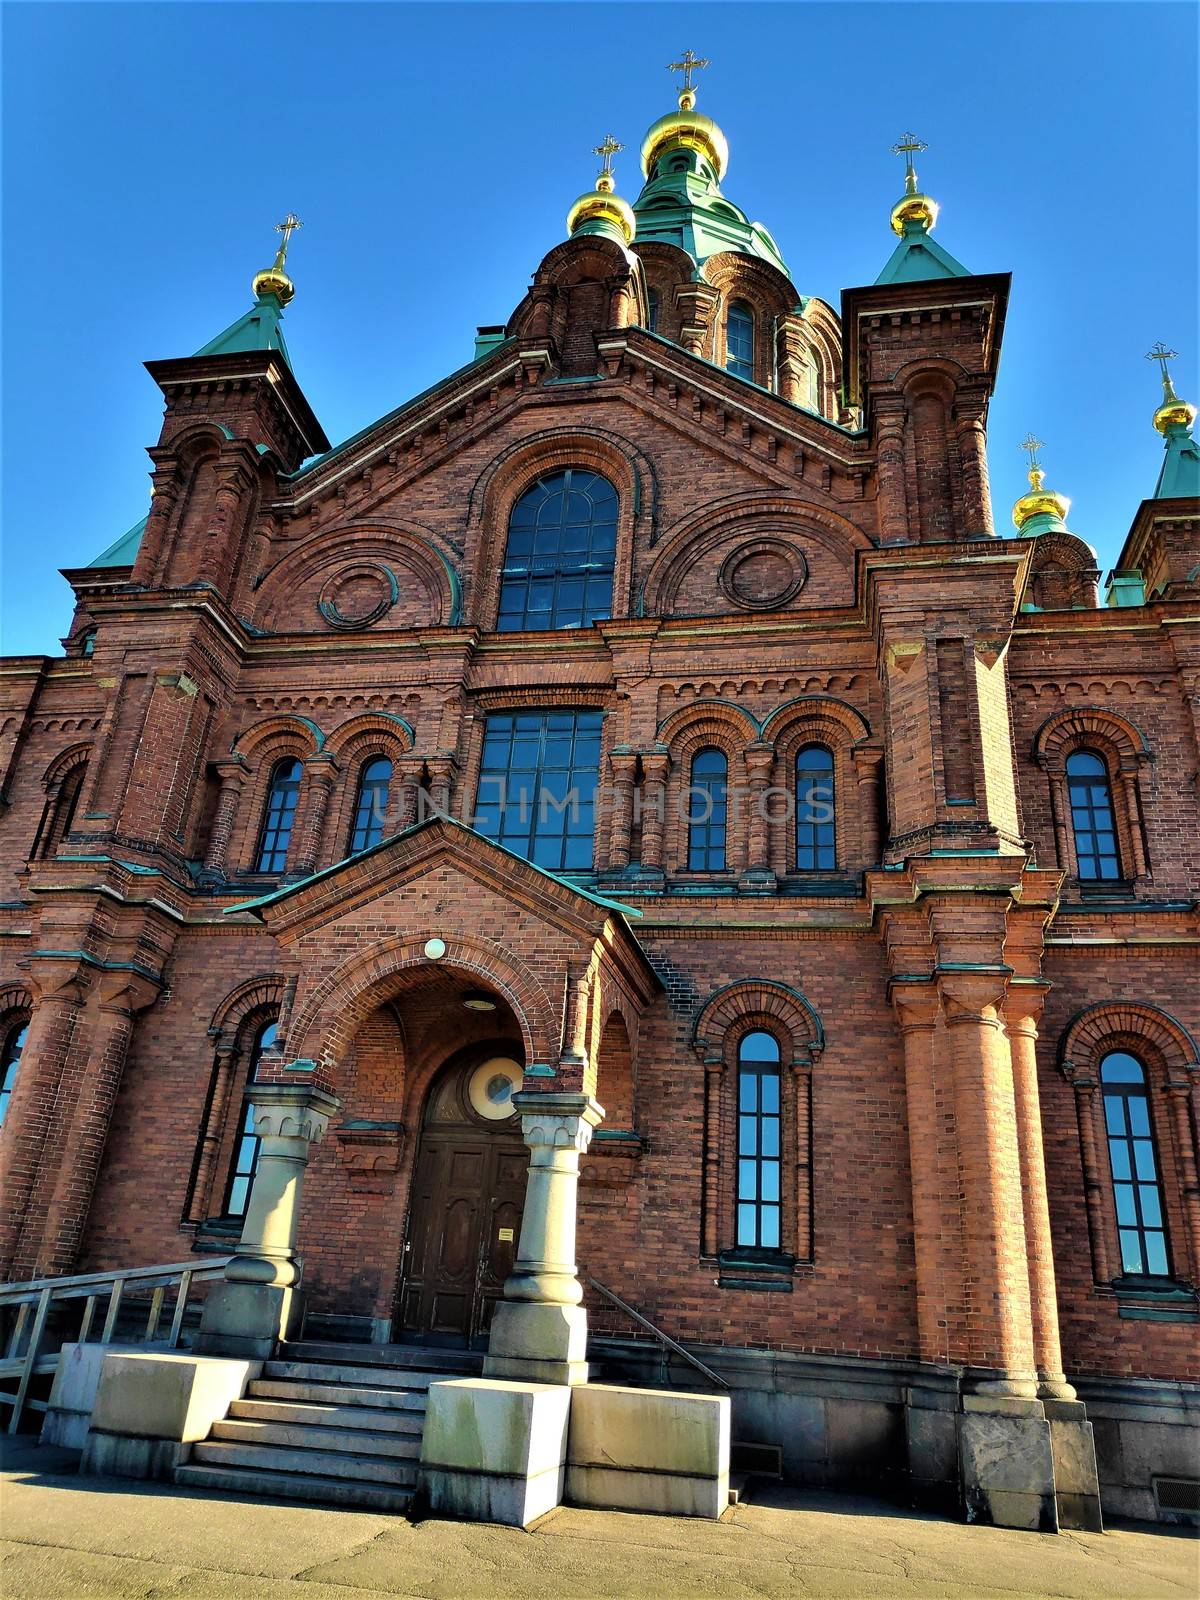 Front view of the Uspenski cathedral in Helsinki, Finland